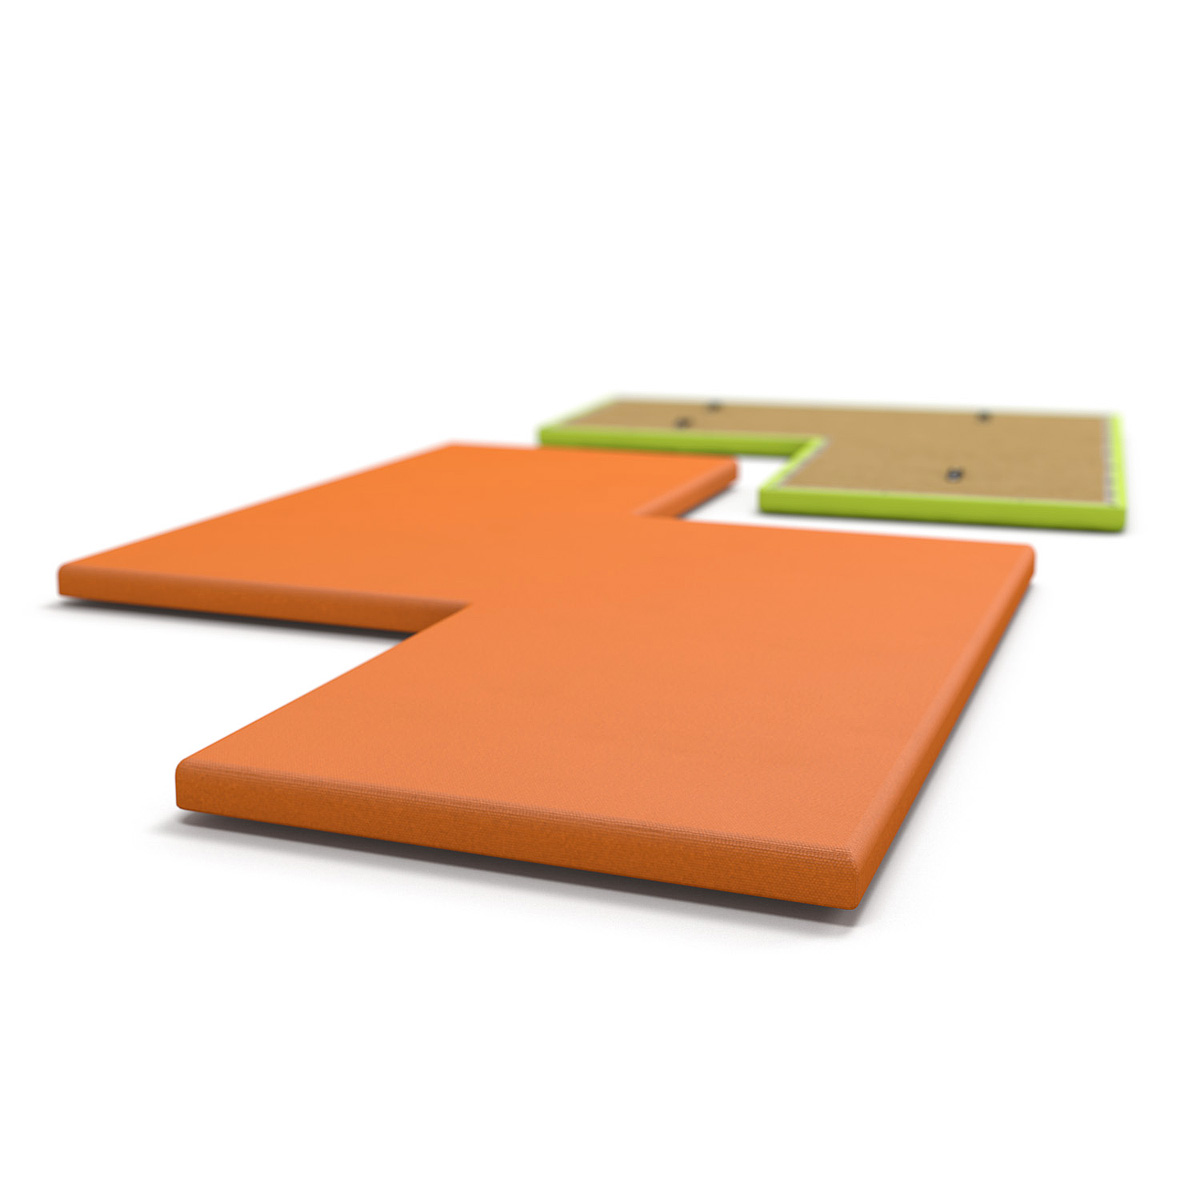 TETRATAK™ Interlocking Acoustic Wallboards Are 26mm Thick & Include Acoustic Foam For Absorbing Office Noise